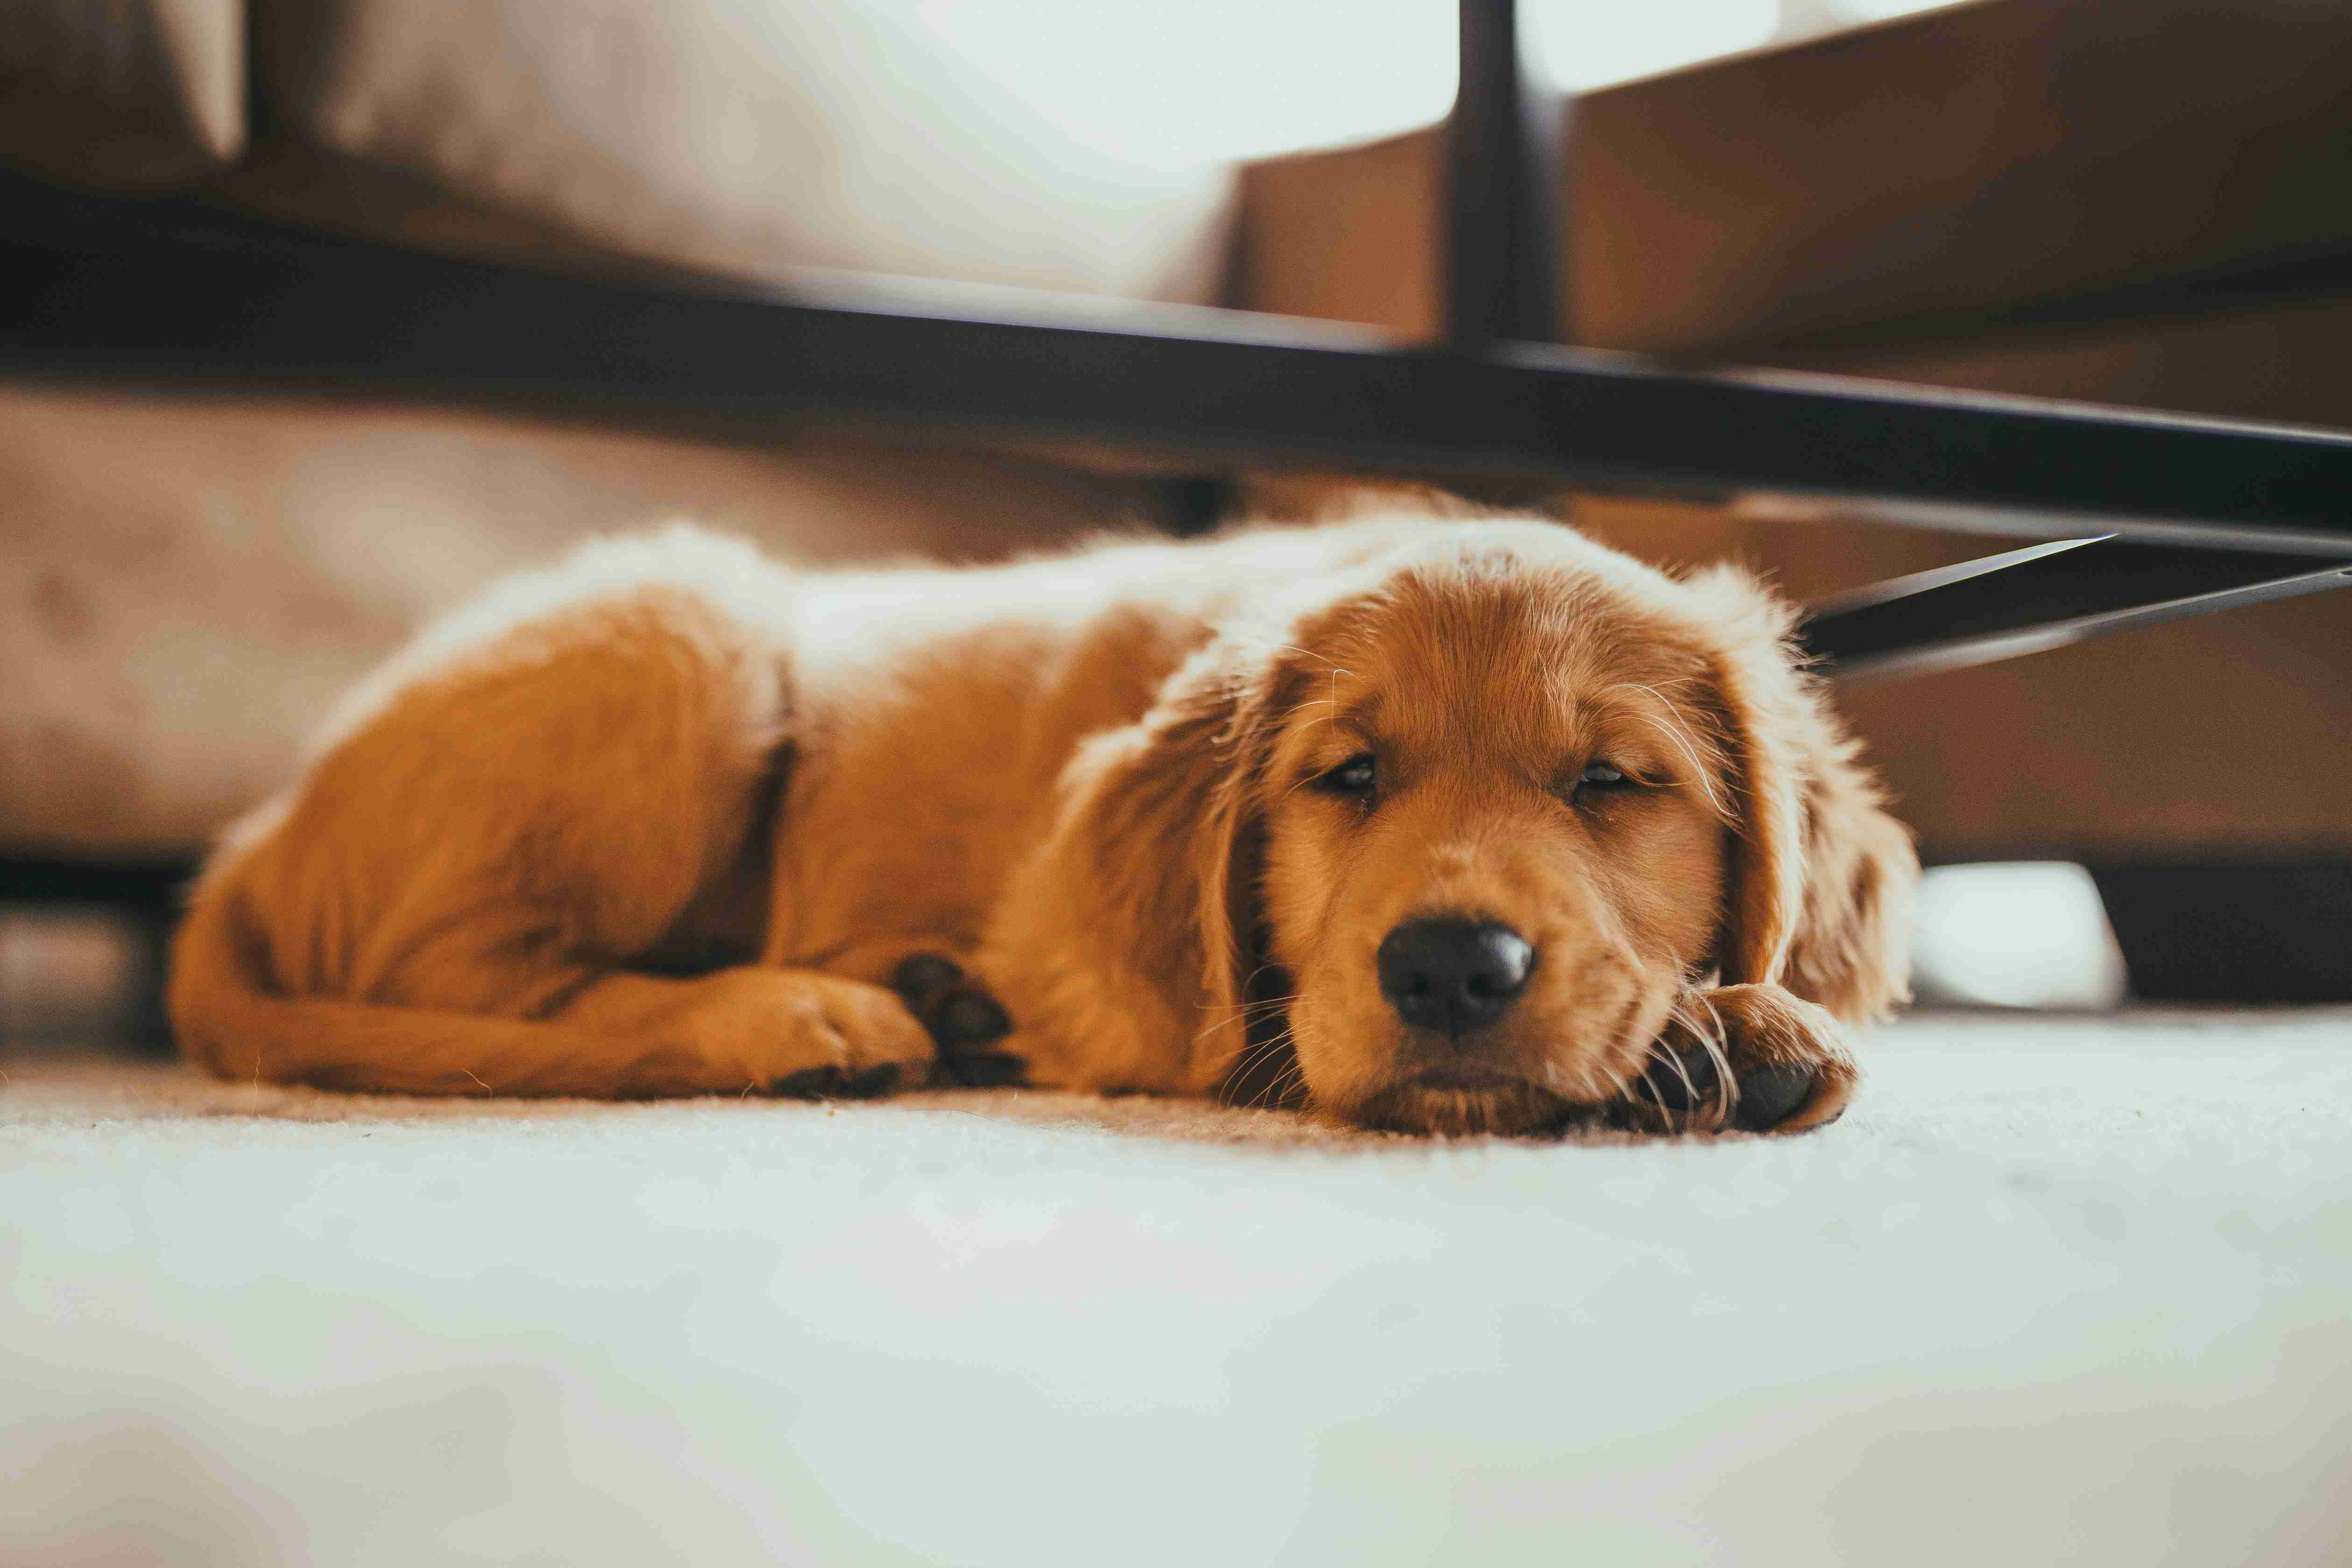 What are some signs of neurological issues in Golden Retrievers?